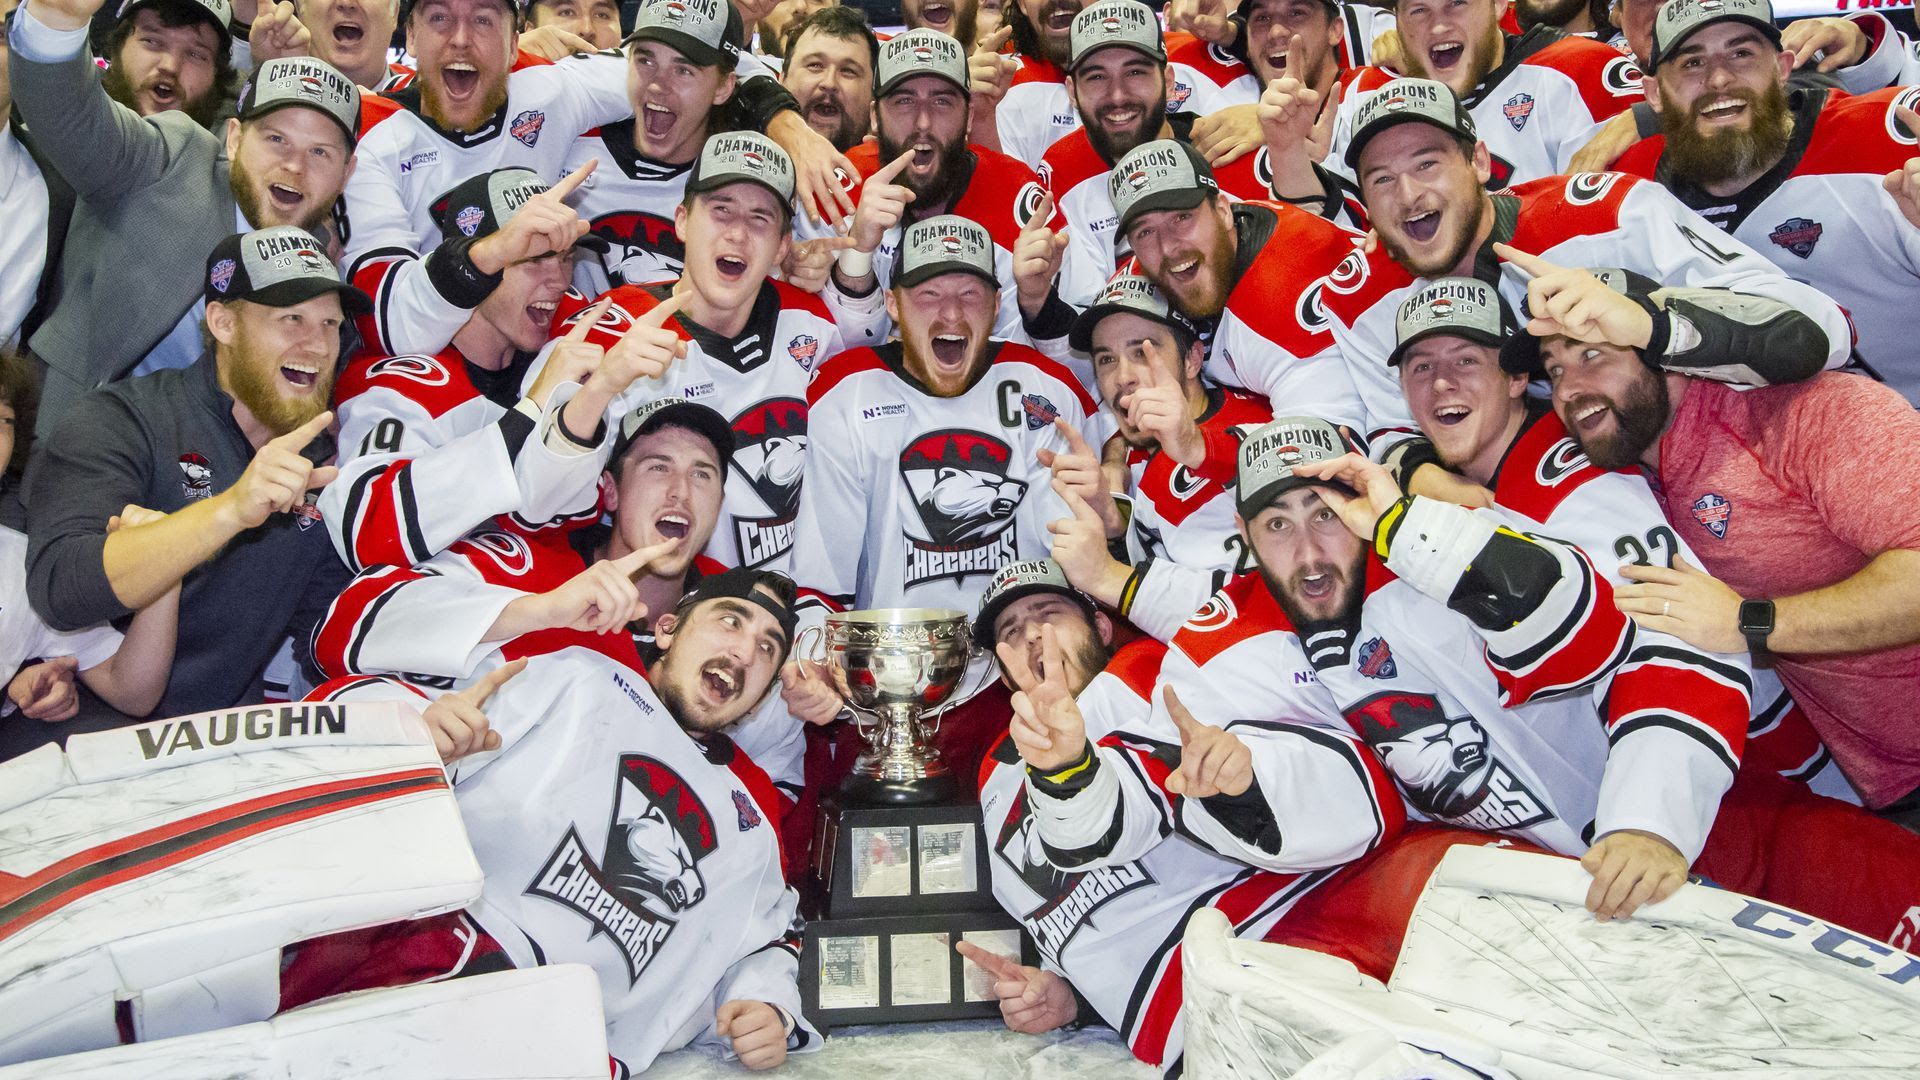 The Charlotte Checkers after winning the 2019 Calder Cup